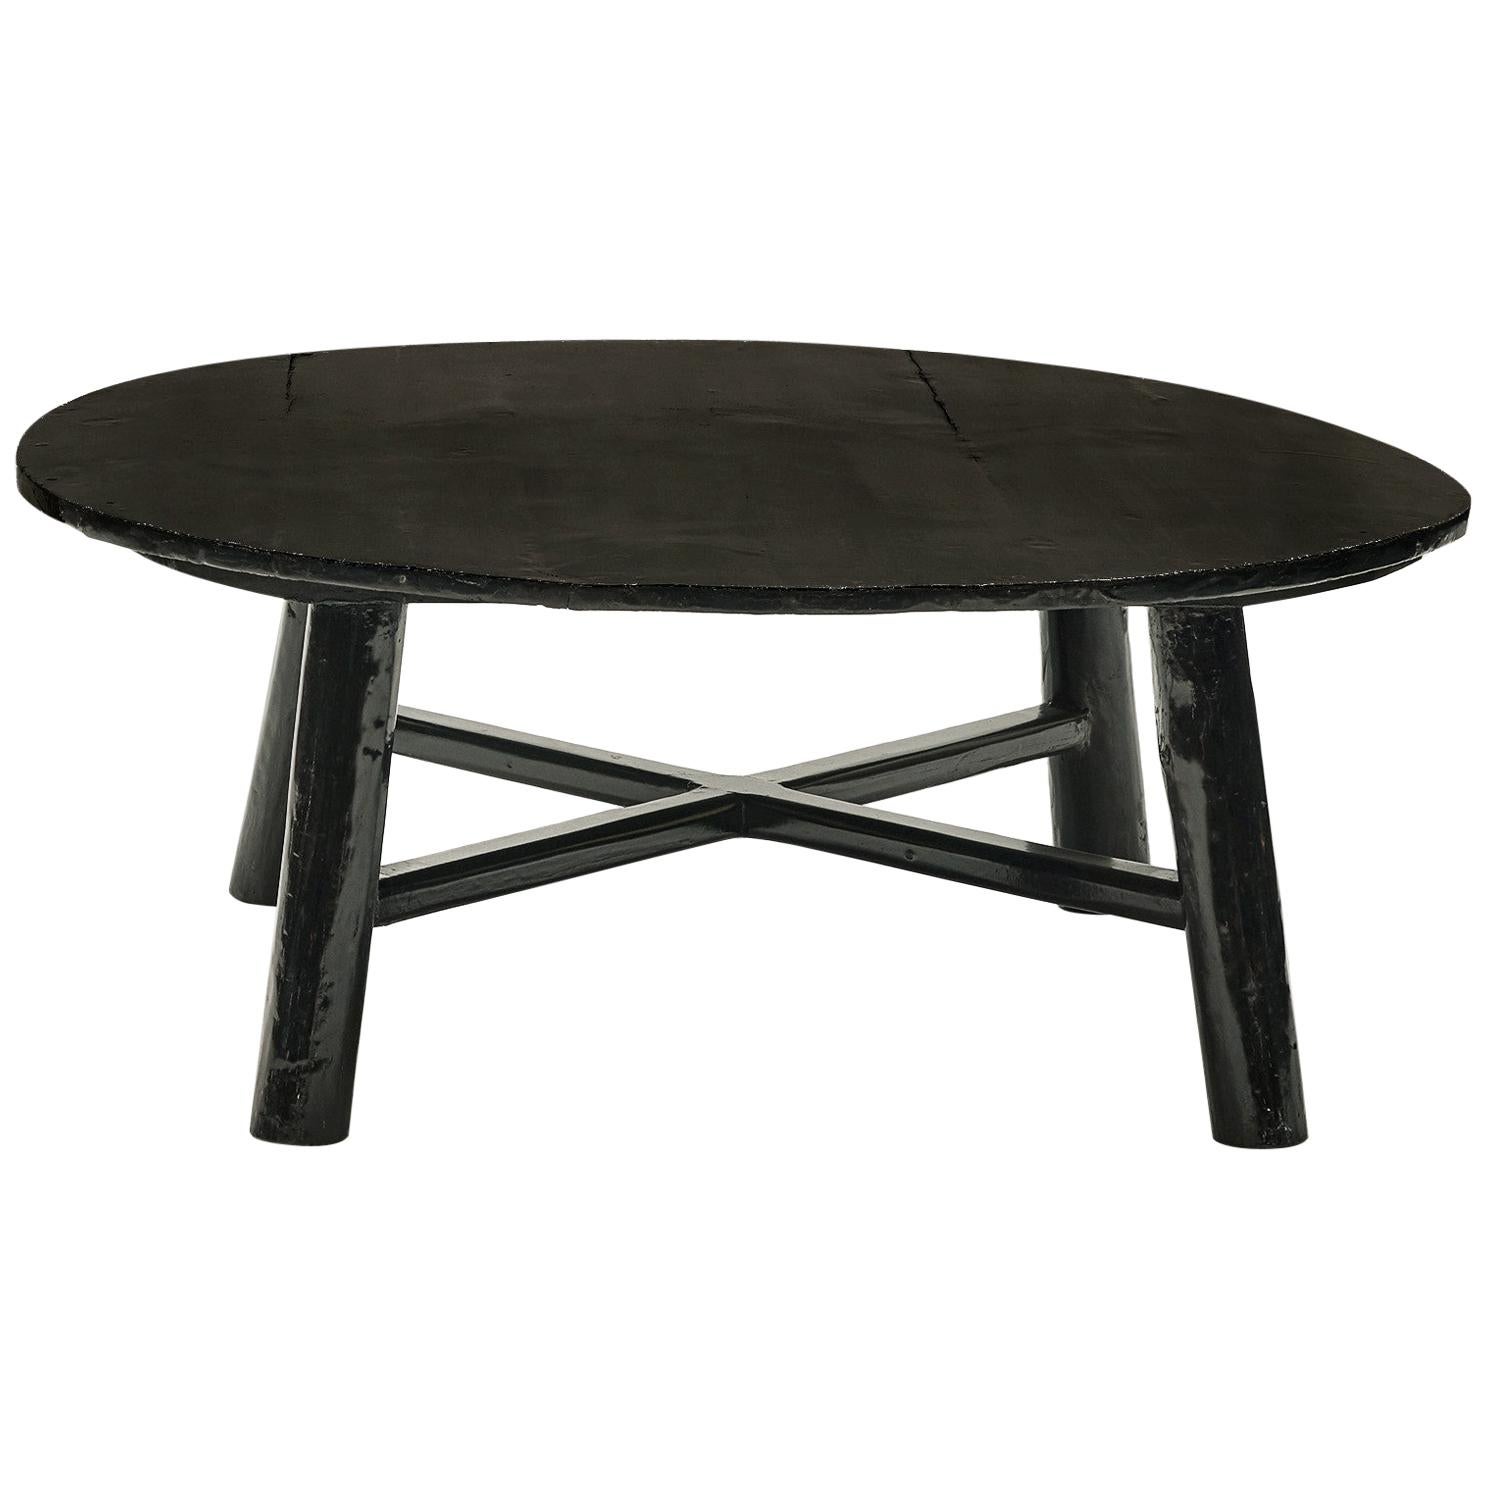 Chinese 19th Century Coffee Table, Original Black Lacquer